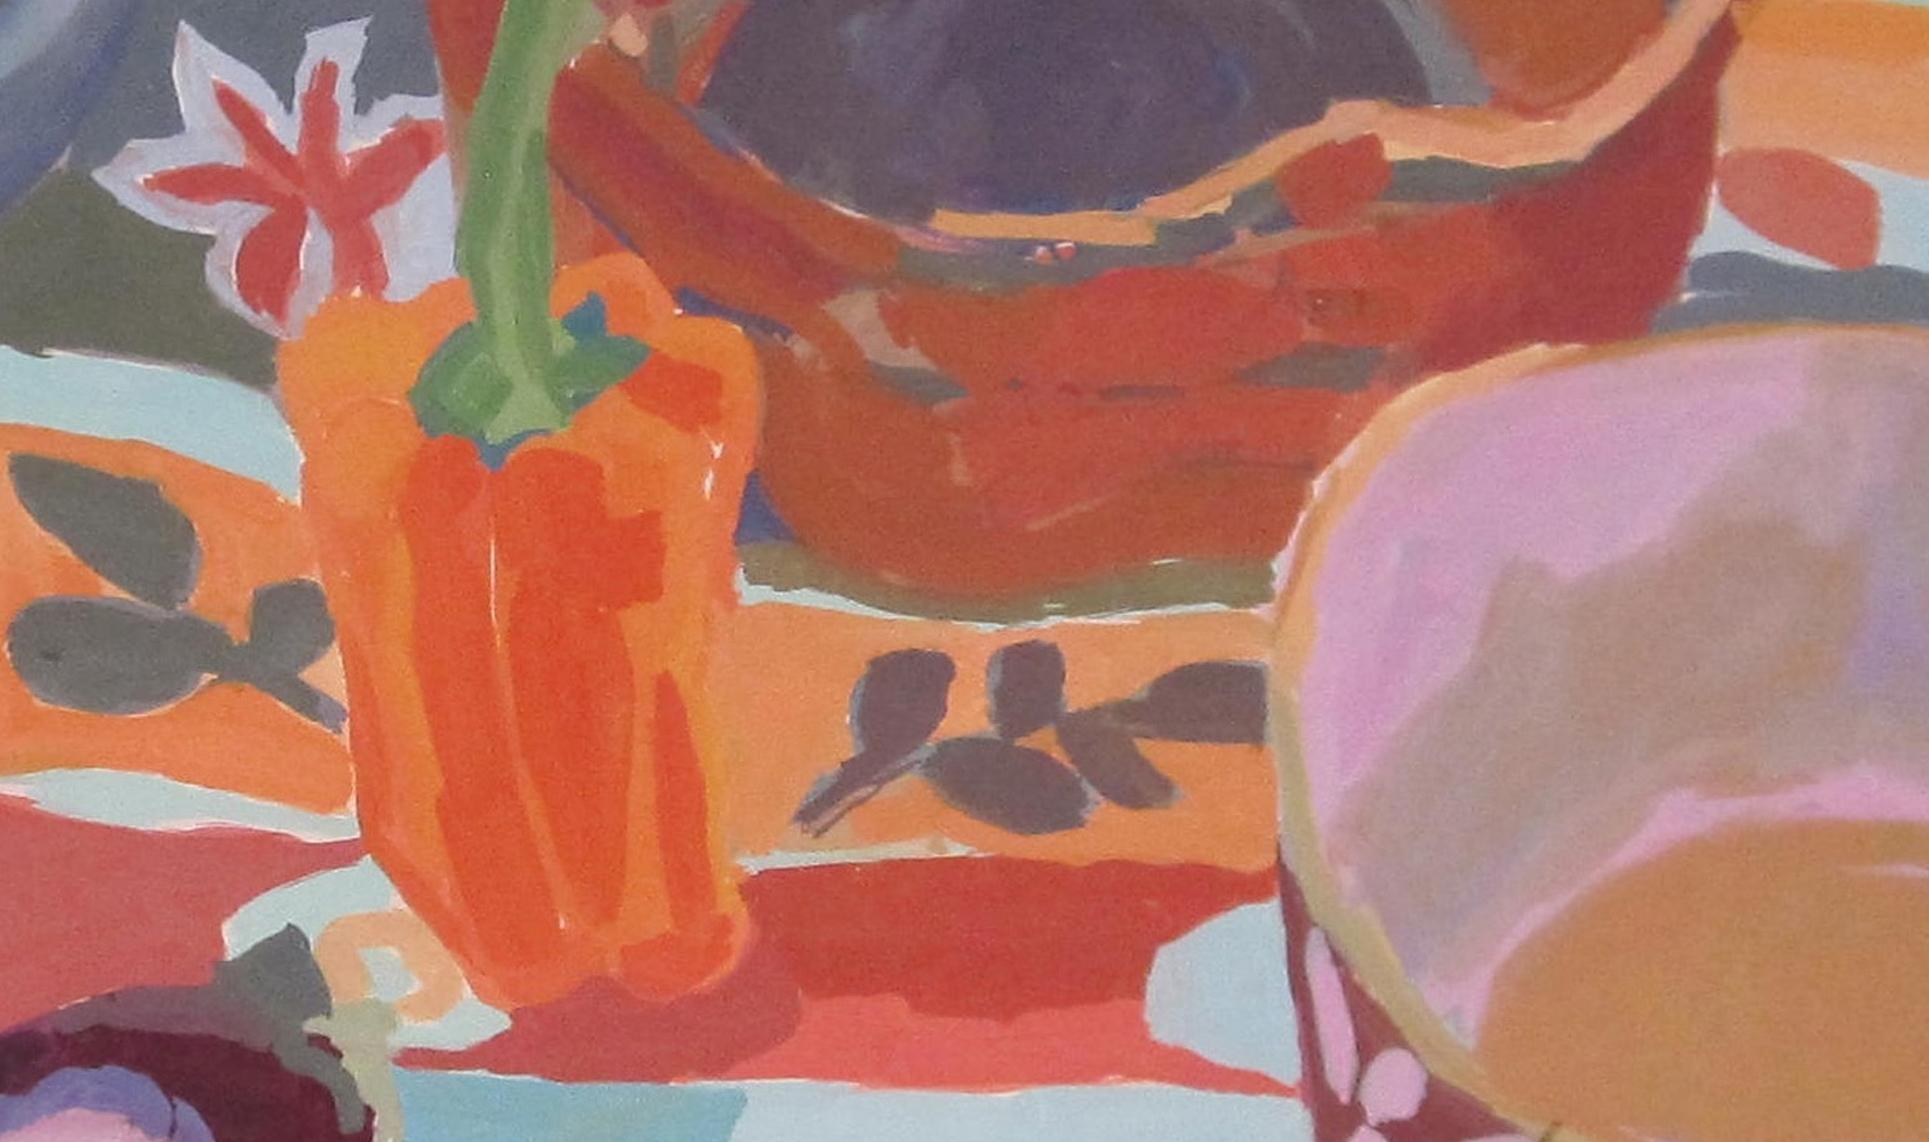 Rosie Montford (British, 20th /21st Century)
Still life with bowls and peppers, 1995
Oil on canvas
Signed, titled and dated on the reverse
86 x 124 cm.

This particular example of Rosie Montford's work illustrates her power with colour and form over